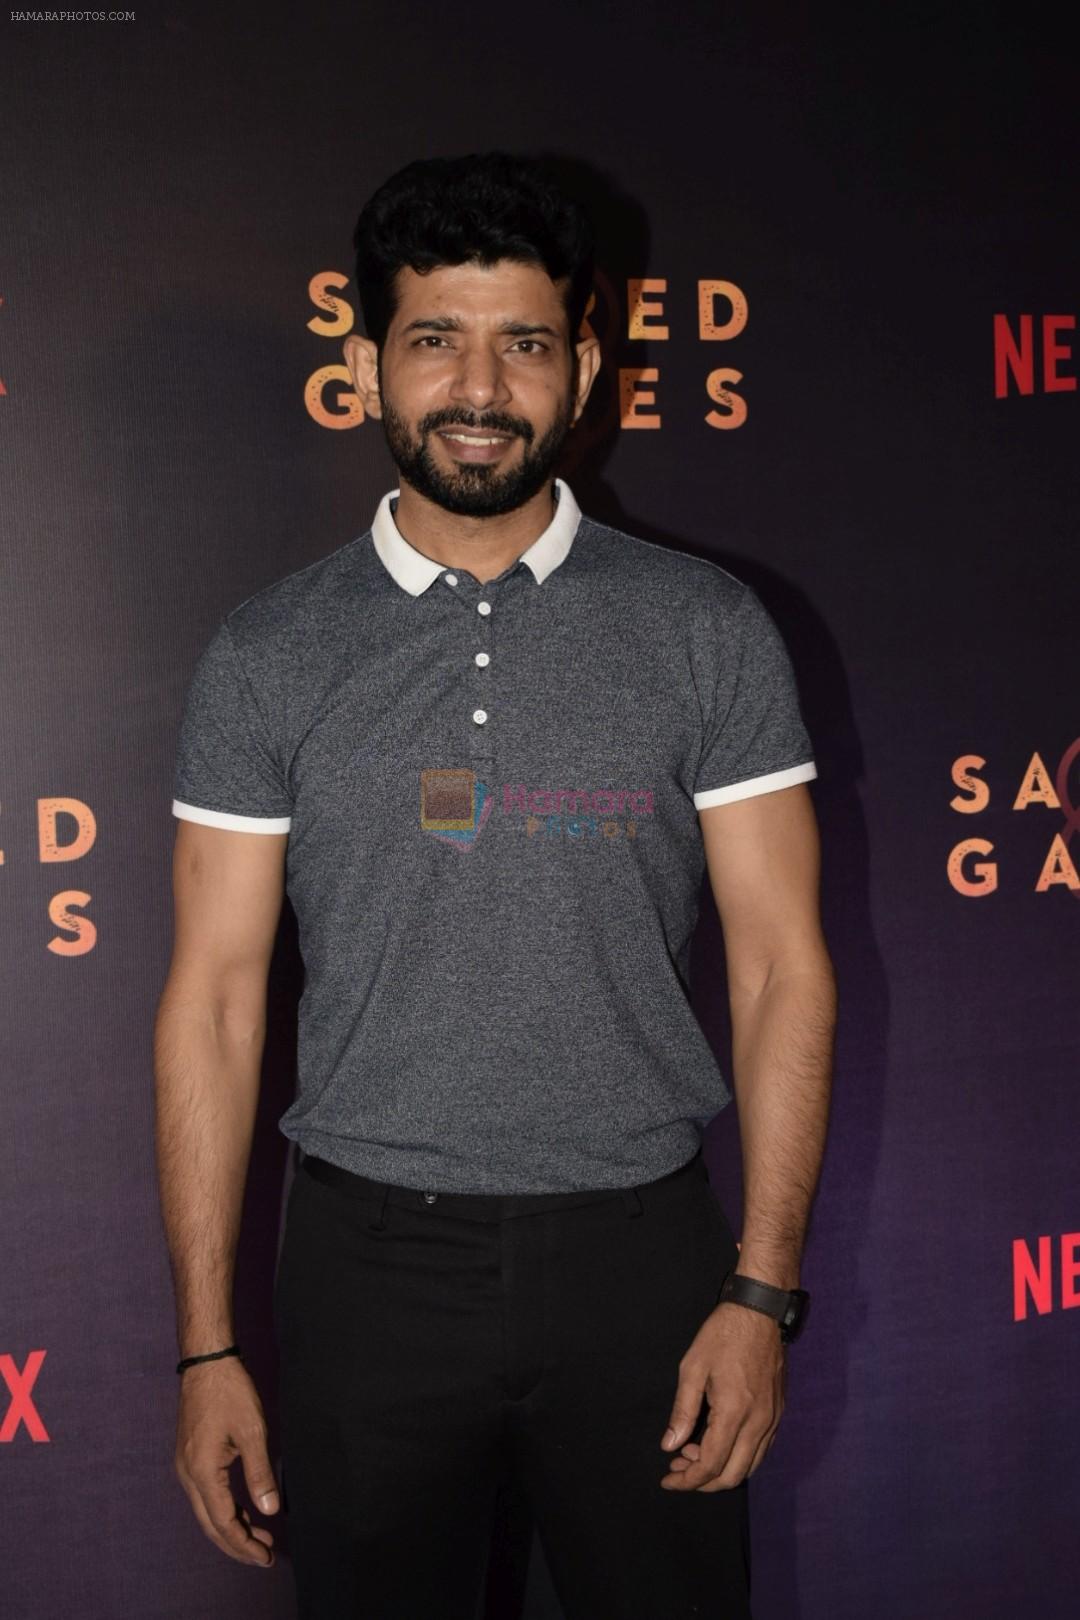 at Sacred Games after party at jw marriott on 28th June 2018